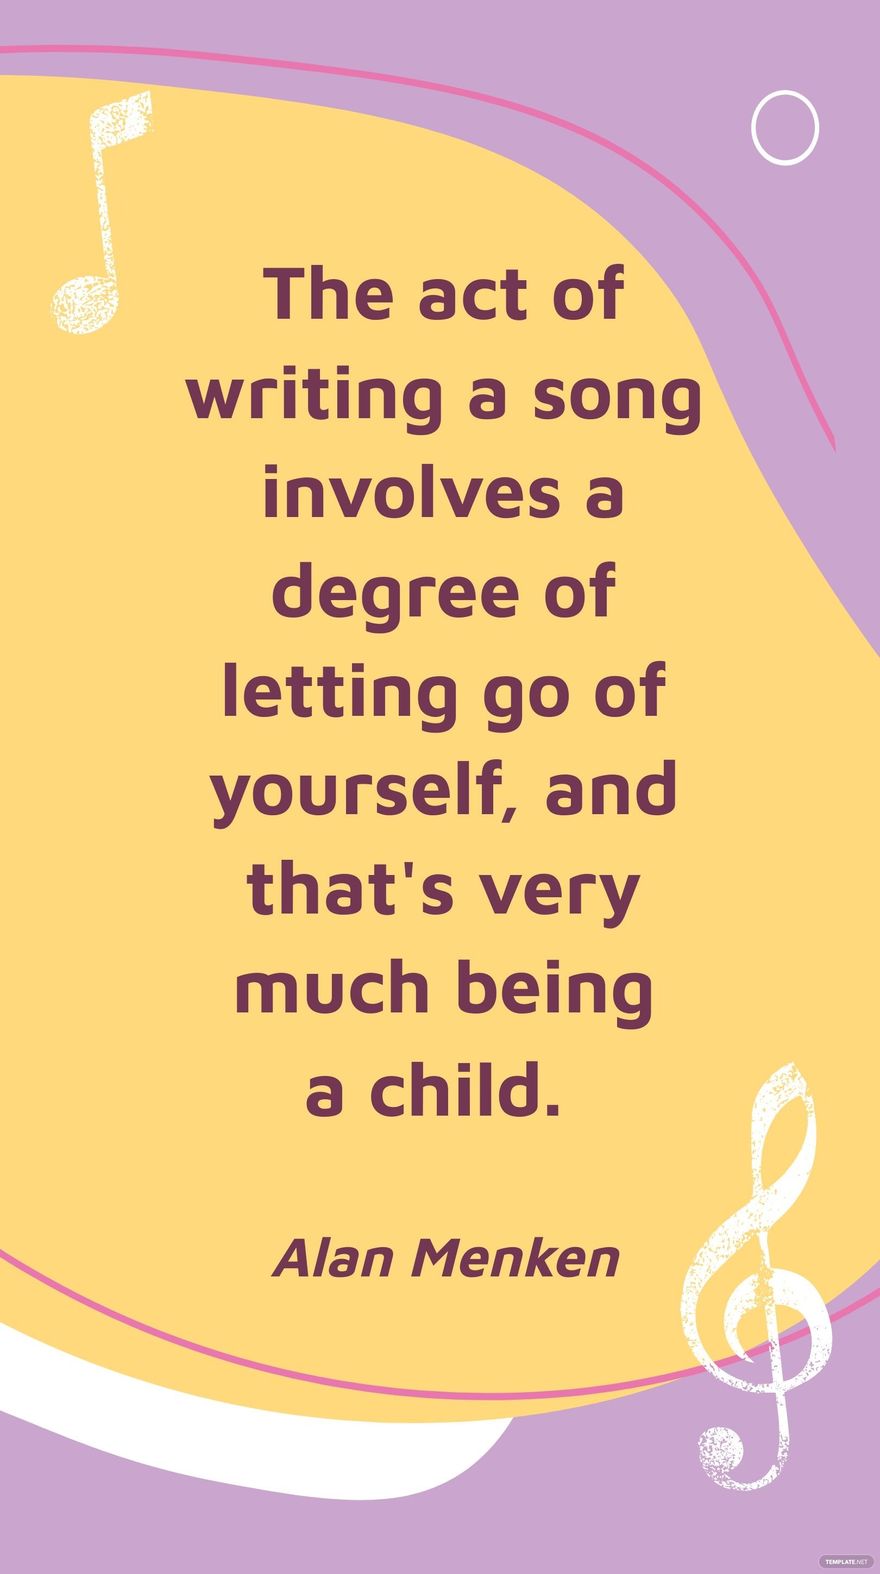 Alan Menken - The act of writing a song involves a degree of letting go of yourself, and that's very much being a child.